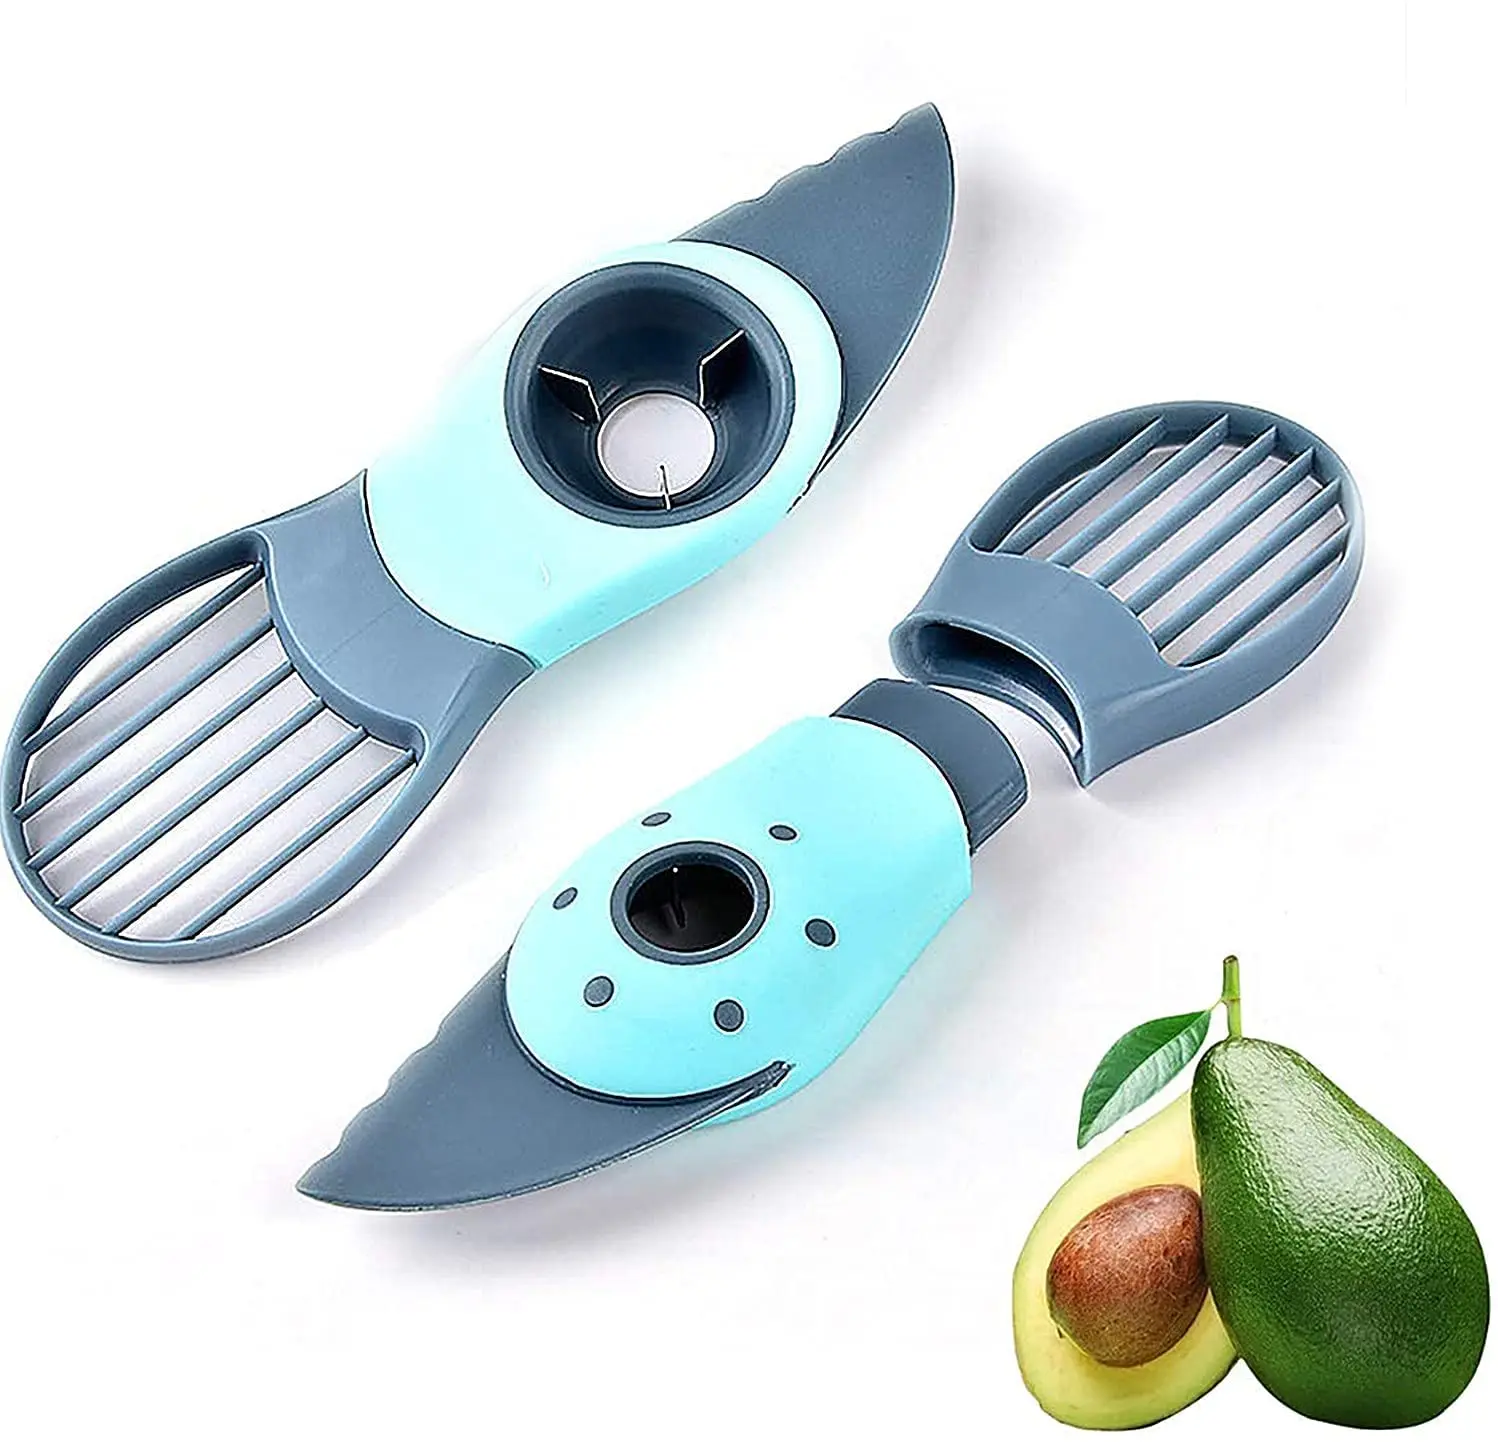 

New Arrivals 3 in 1 Multifunction Kitchen Gadgets peeler and pitter Avocado Cutter Tool Avocado Slicer with detachable handle, Blue